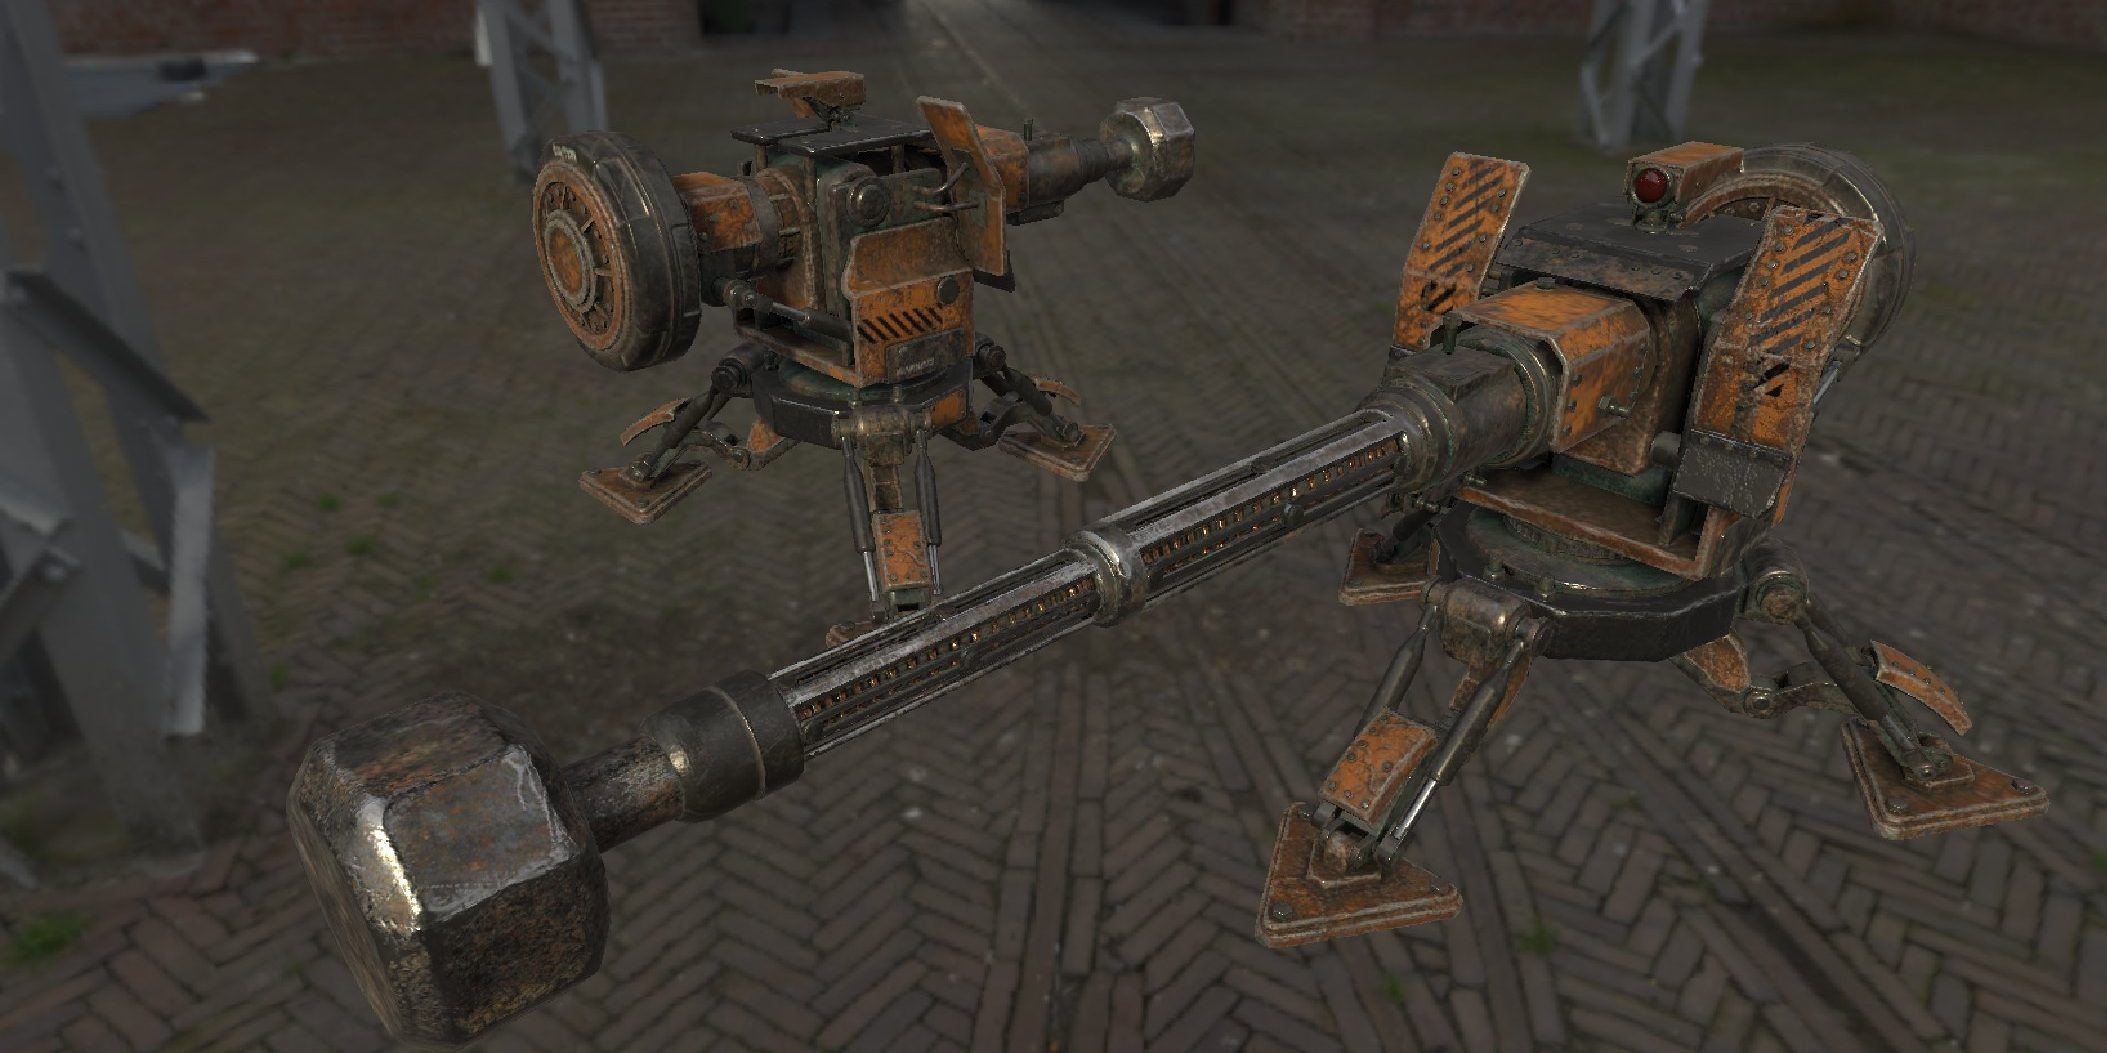 A close-up screenshot of the Robotic Sledge turret from 7 Days To Die.